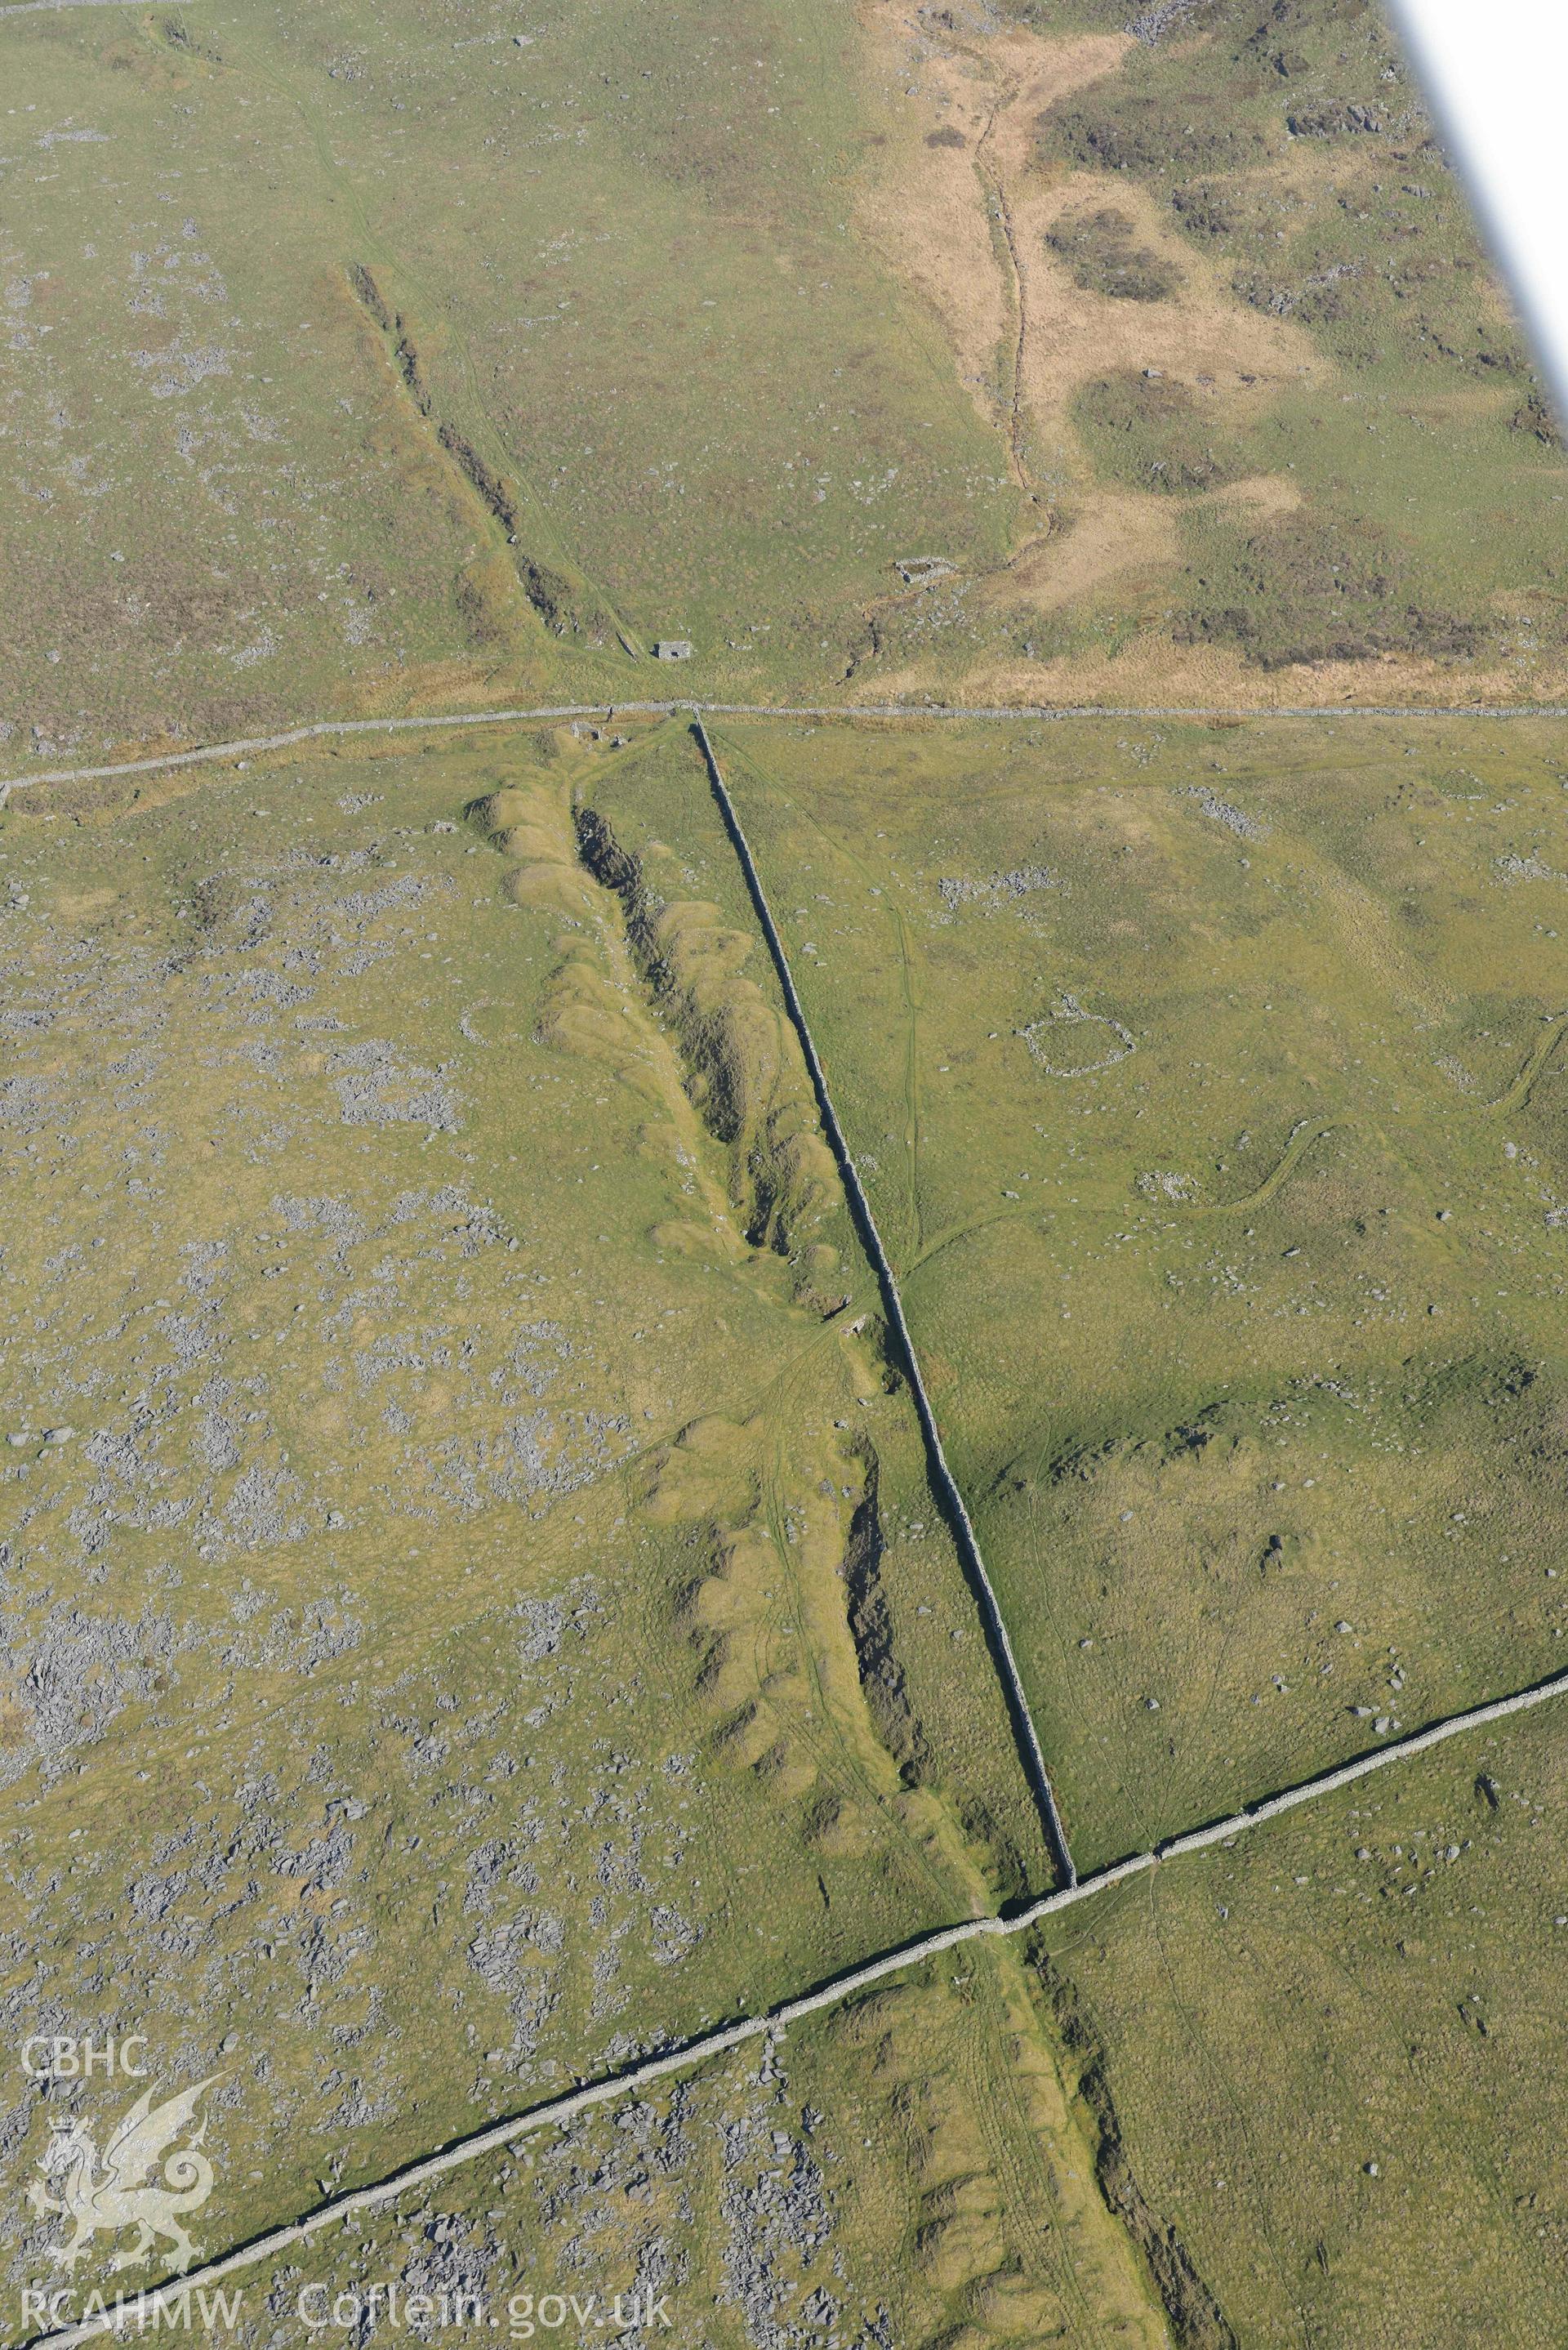 Ergyn and Hafotty manganese mines, with sheepfold. Oblique aerial photograph taken during the Royal Commission’s programme of archaeological aerial reconnaissance by Toby Driver on 25 March 2022.